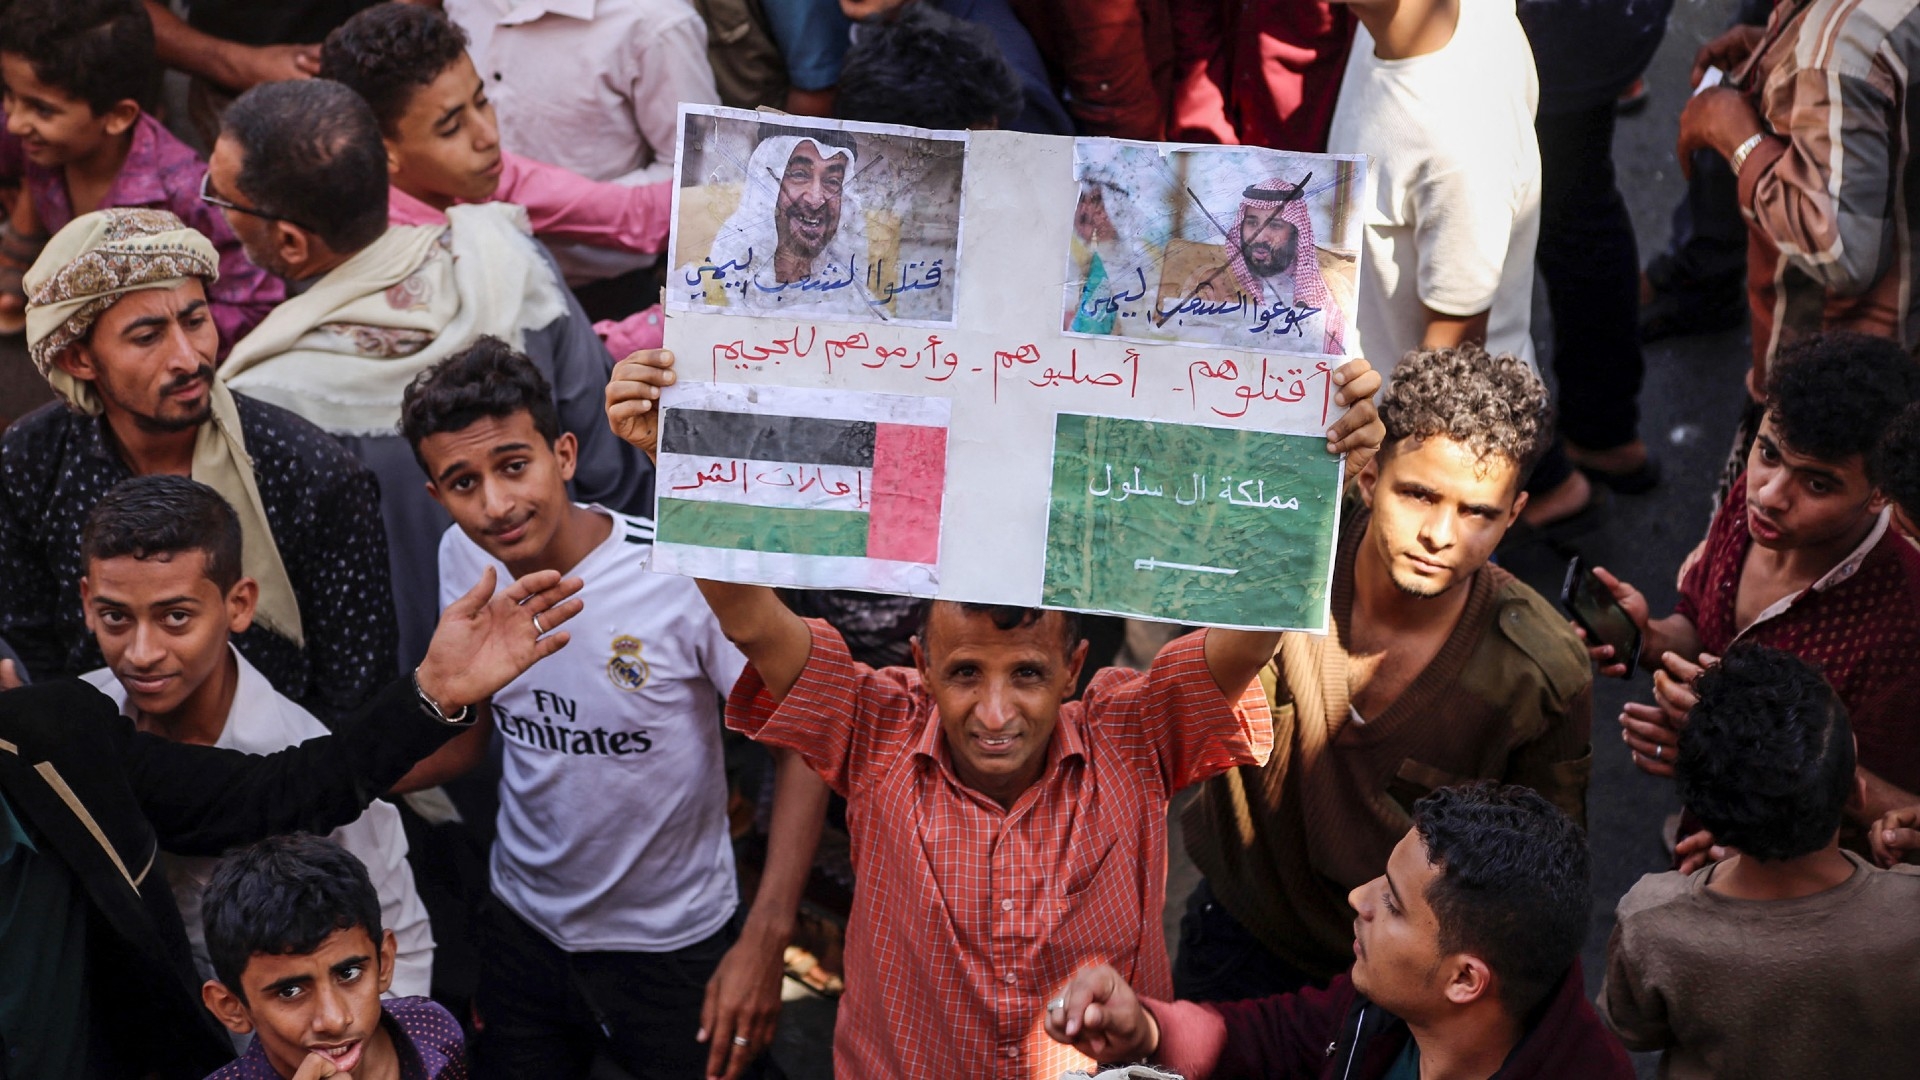 A Yemeni protester holds up a sign showing the crossed-out faces of the Saudi Crown Prince Mohamed bin Salman (R) and Emirati President Mohamed bin Zayed (L) in the southwestern Yemeni city of Taiz on 4 October 2018 (AFP/Ahmad al-Basha)